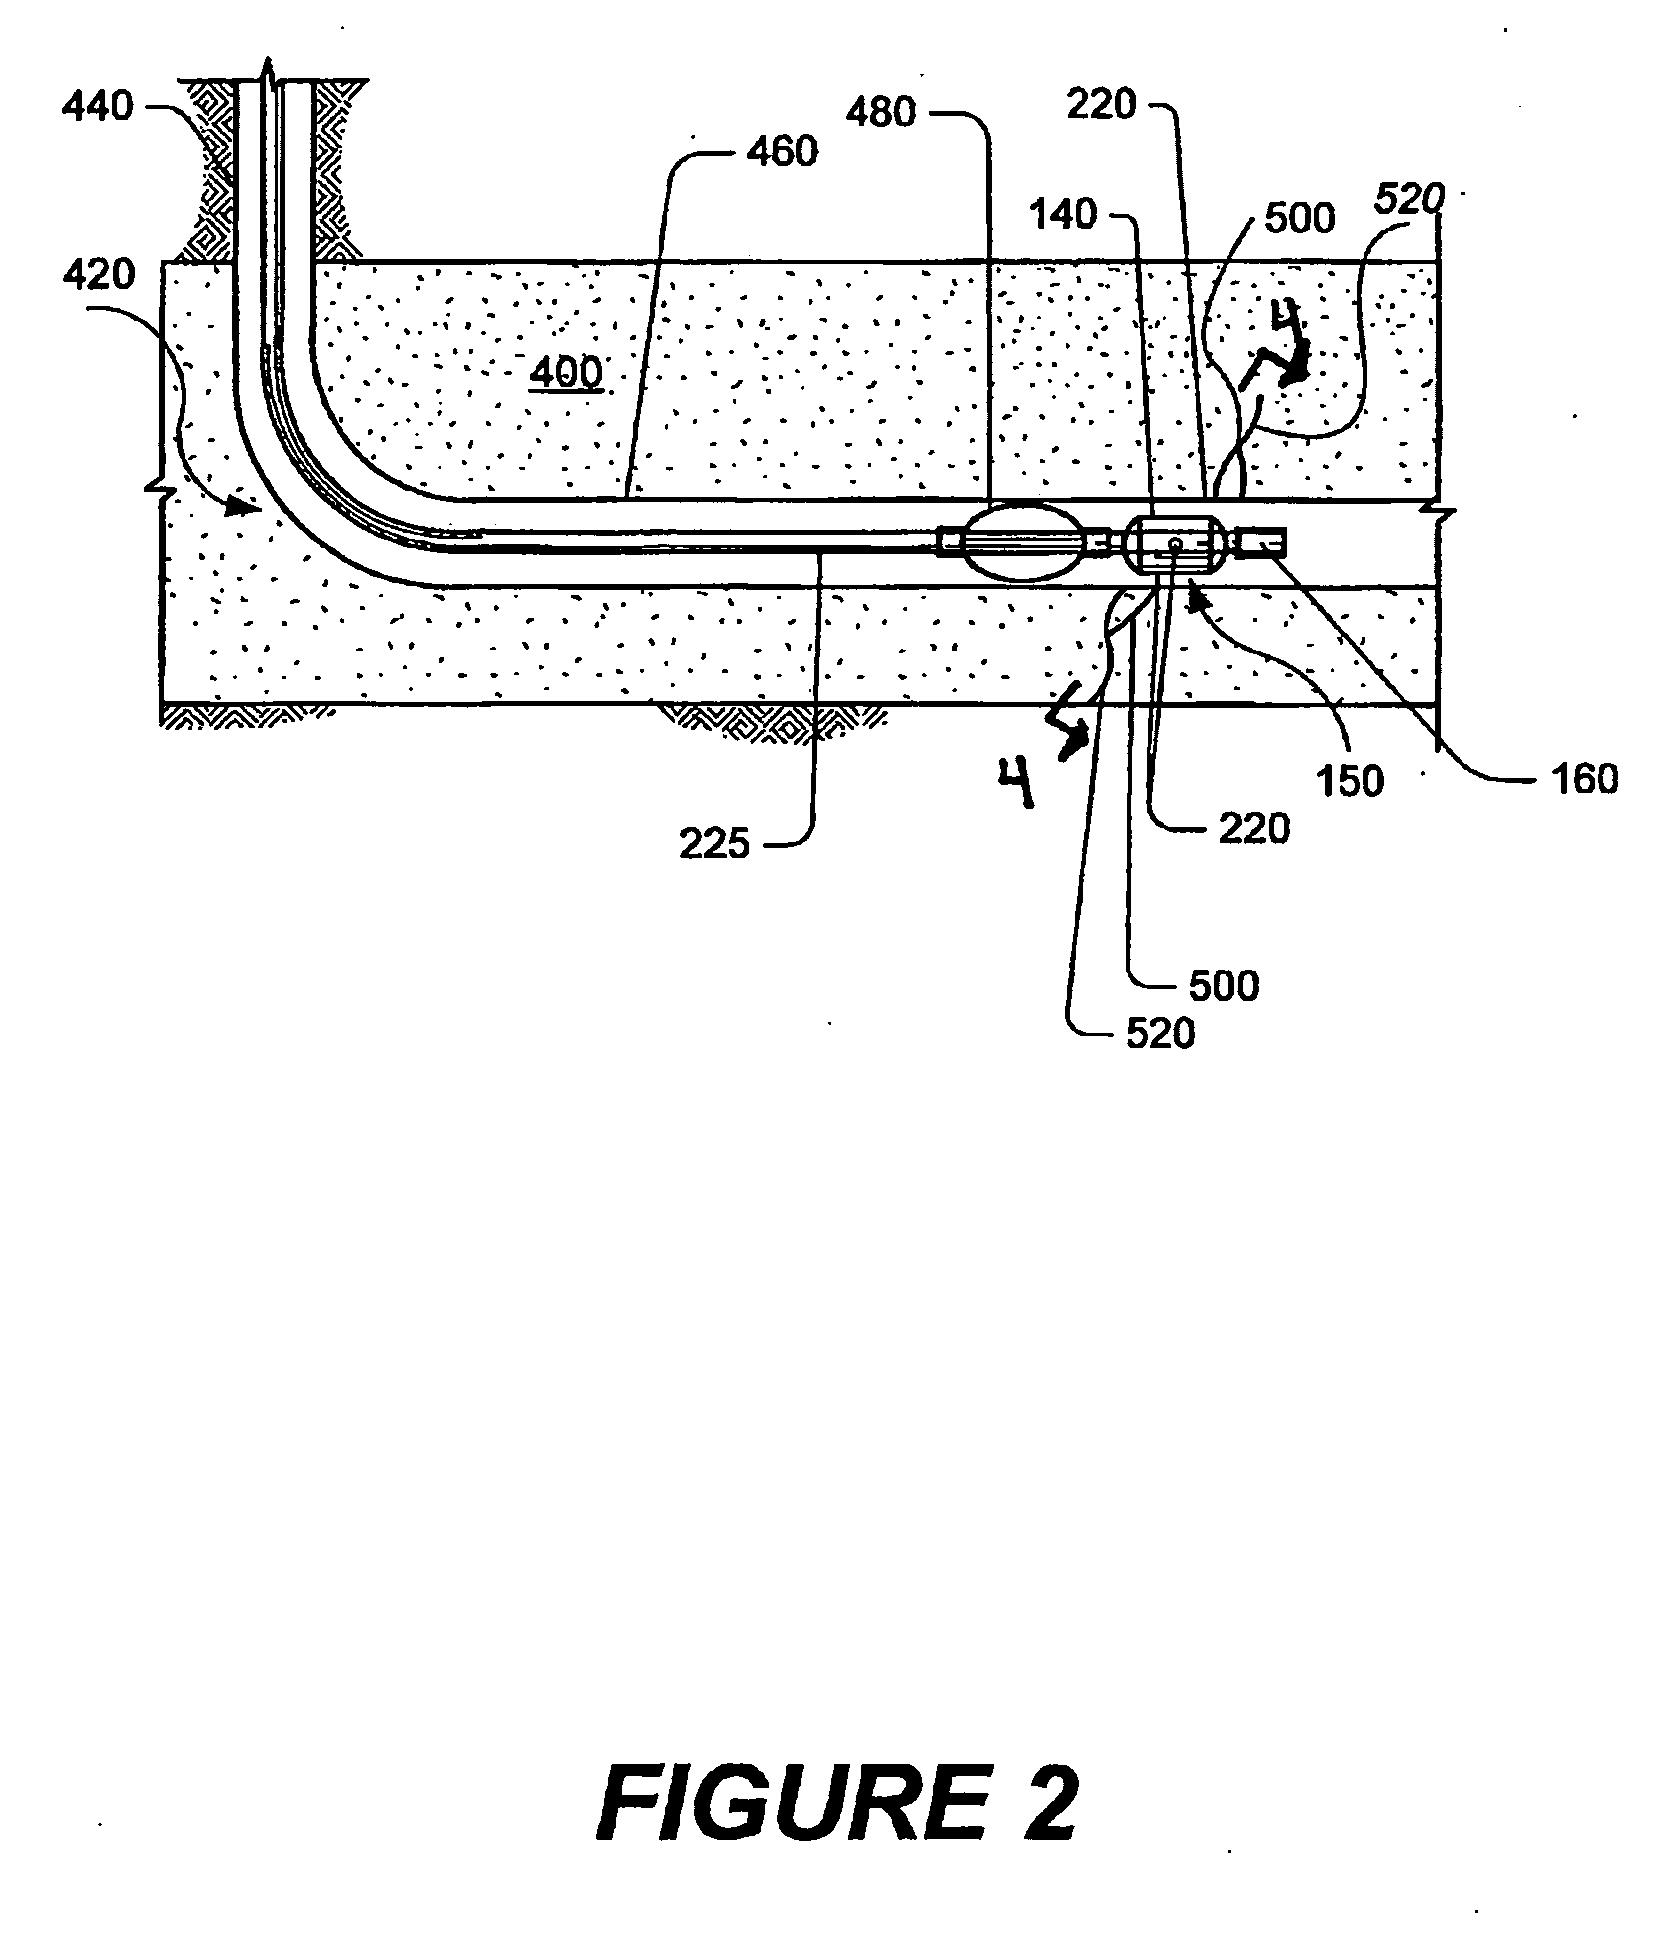 Methods of treating subterranean formations using low-temperature fluids